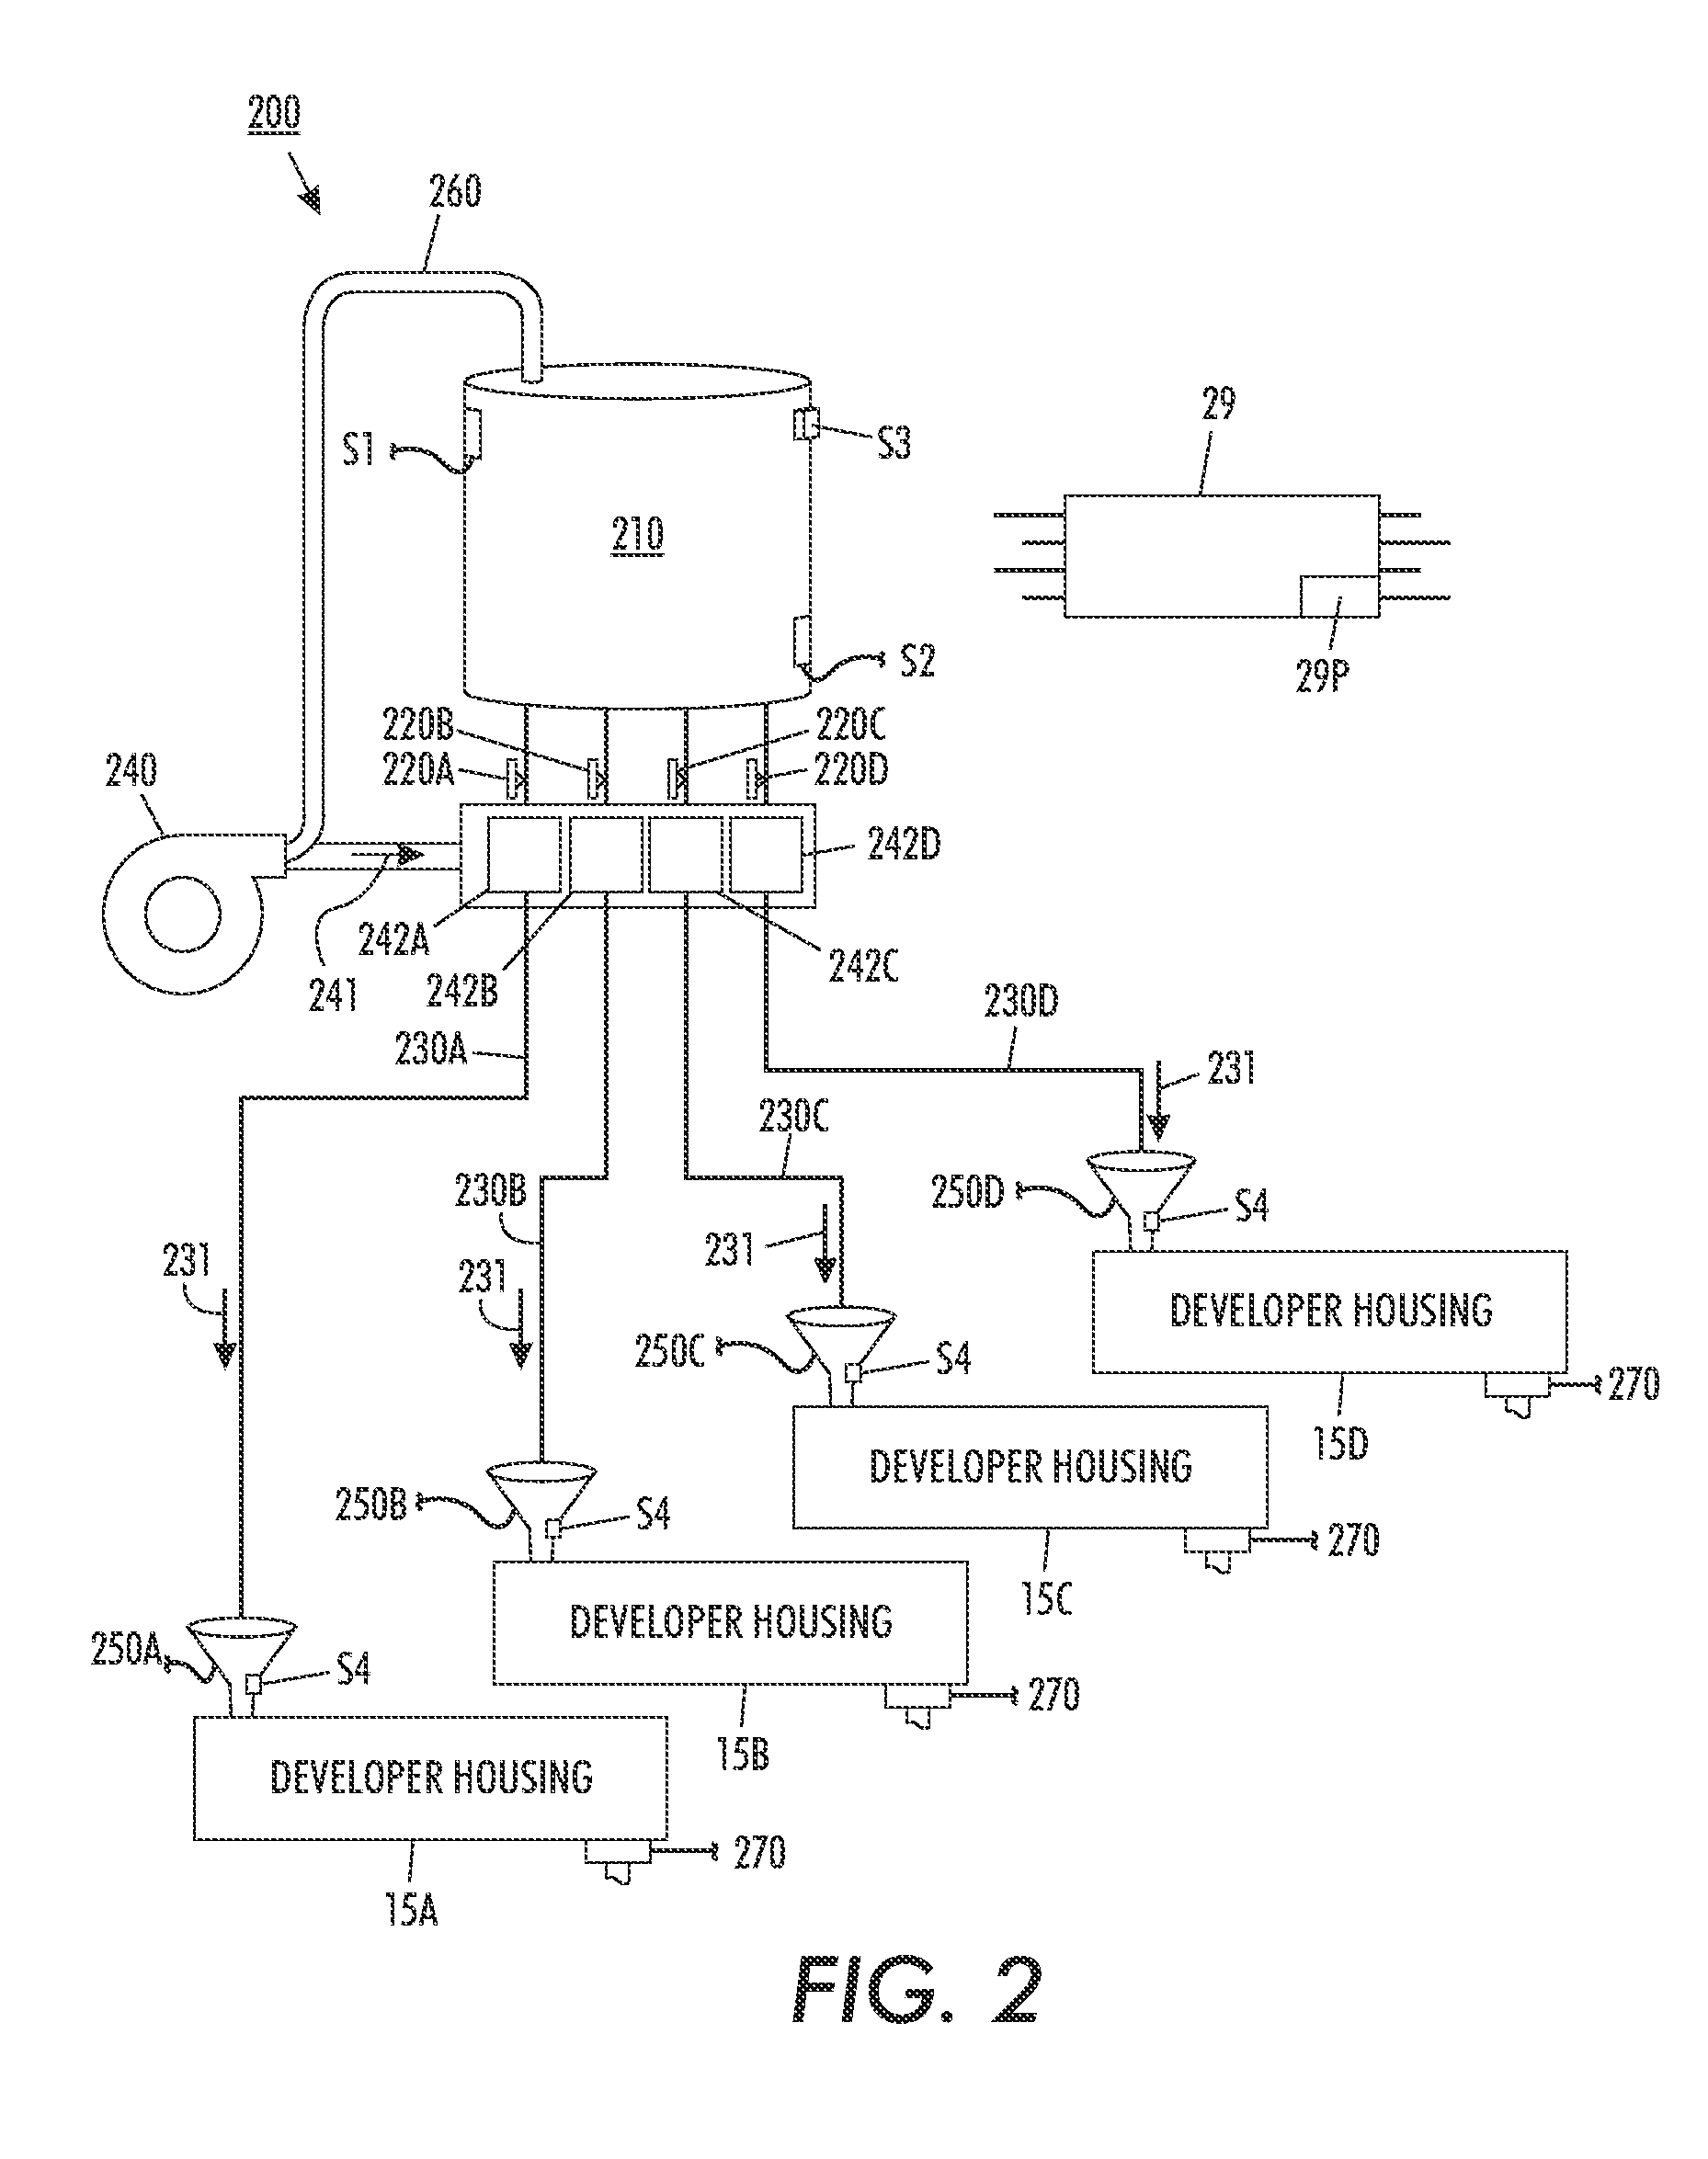 Carrier replenishment and image mottle reduction system